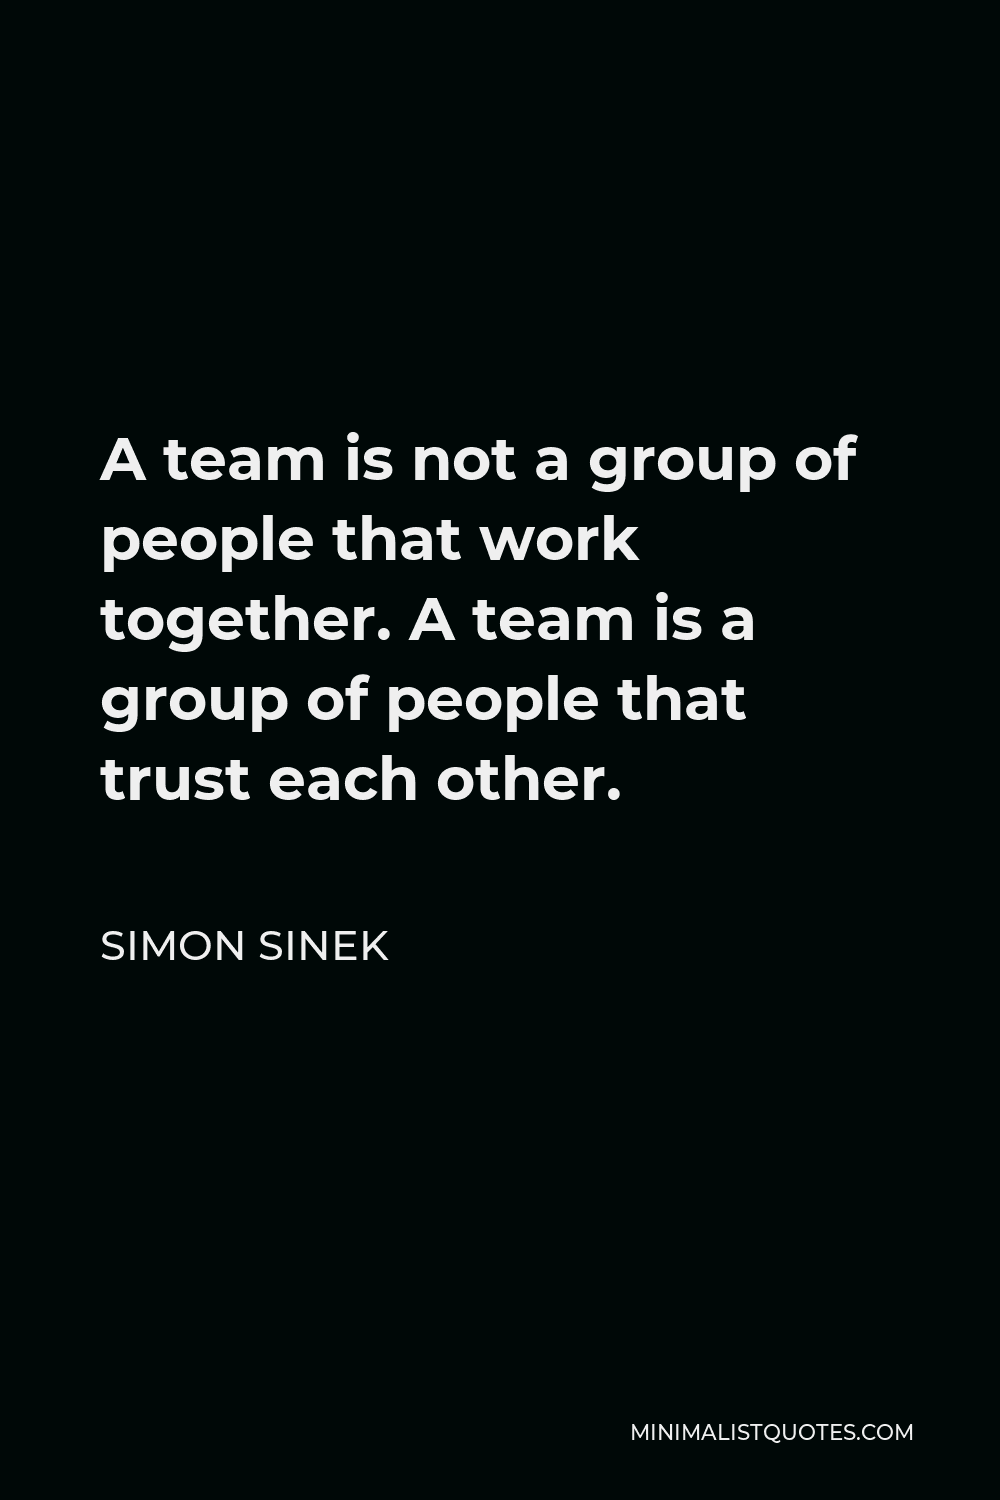 Simon Sinek Quote: A team is not a group of people that work together ...